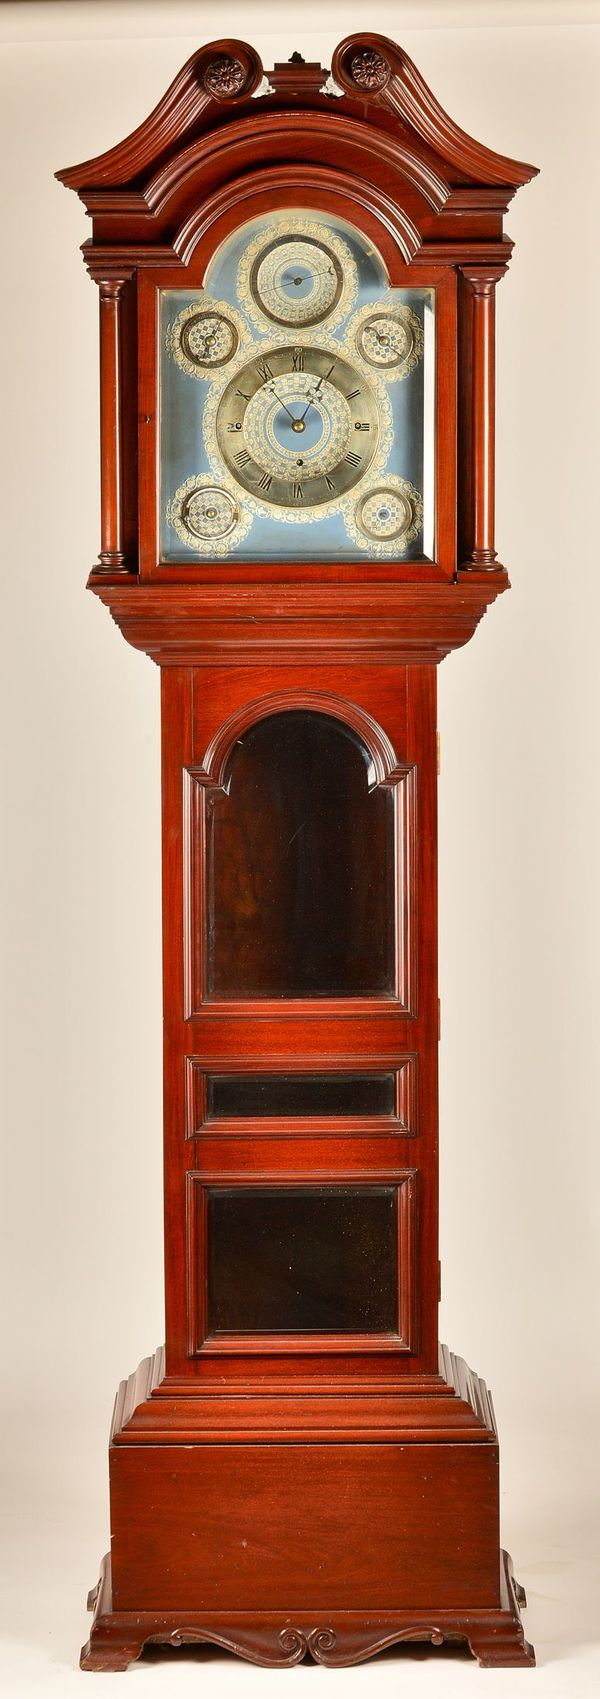 A FINE AND RARE EDWARDIAN QUARTER CHIMING AND STRIKING LONGCASE CLOCK WITH WEDGWOOD DIAL